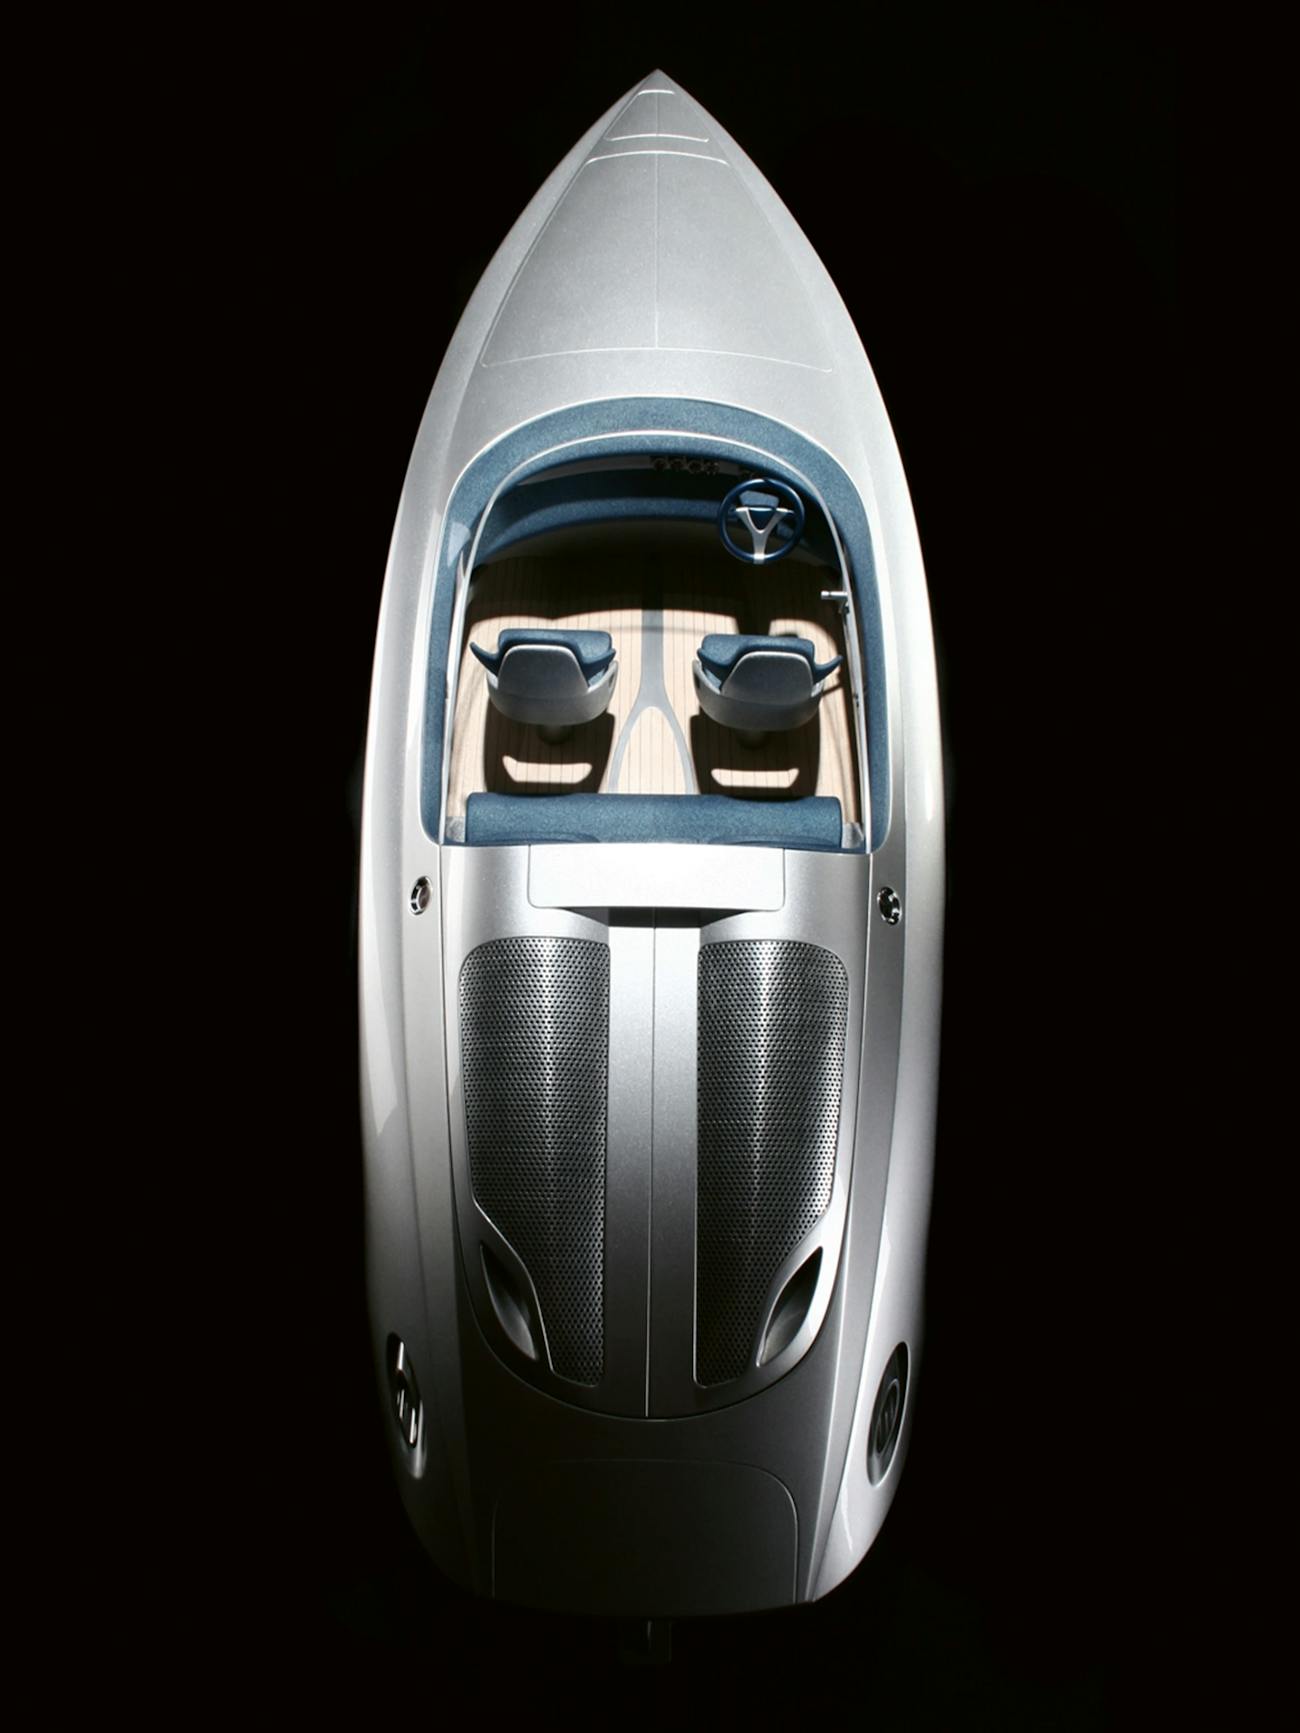 The Fearless 28 speedboat transferred signature Porsche characteristics from the open road to open water